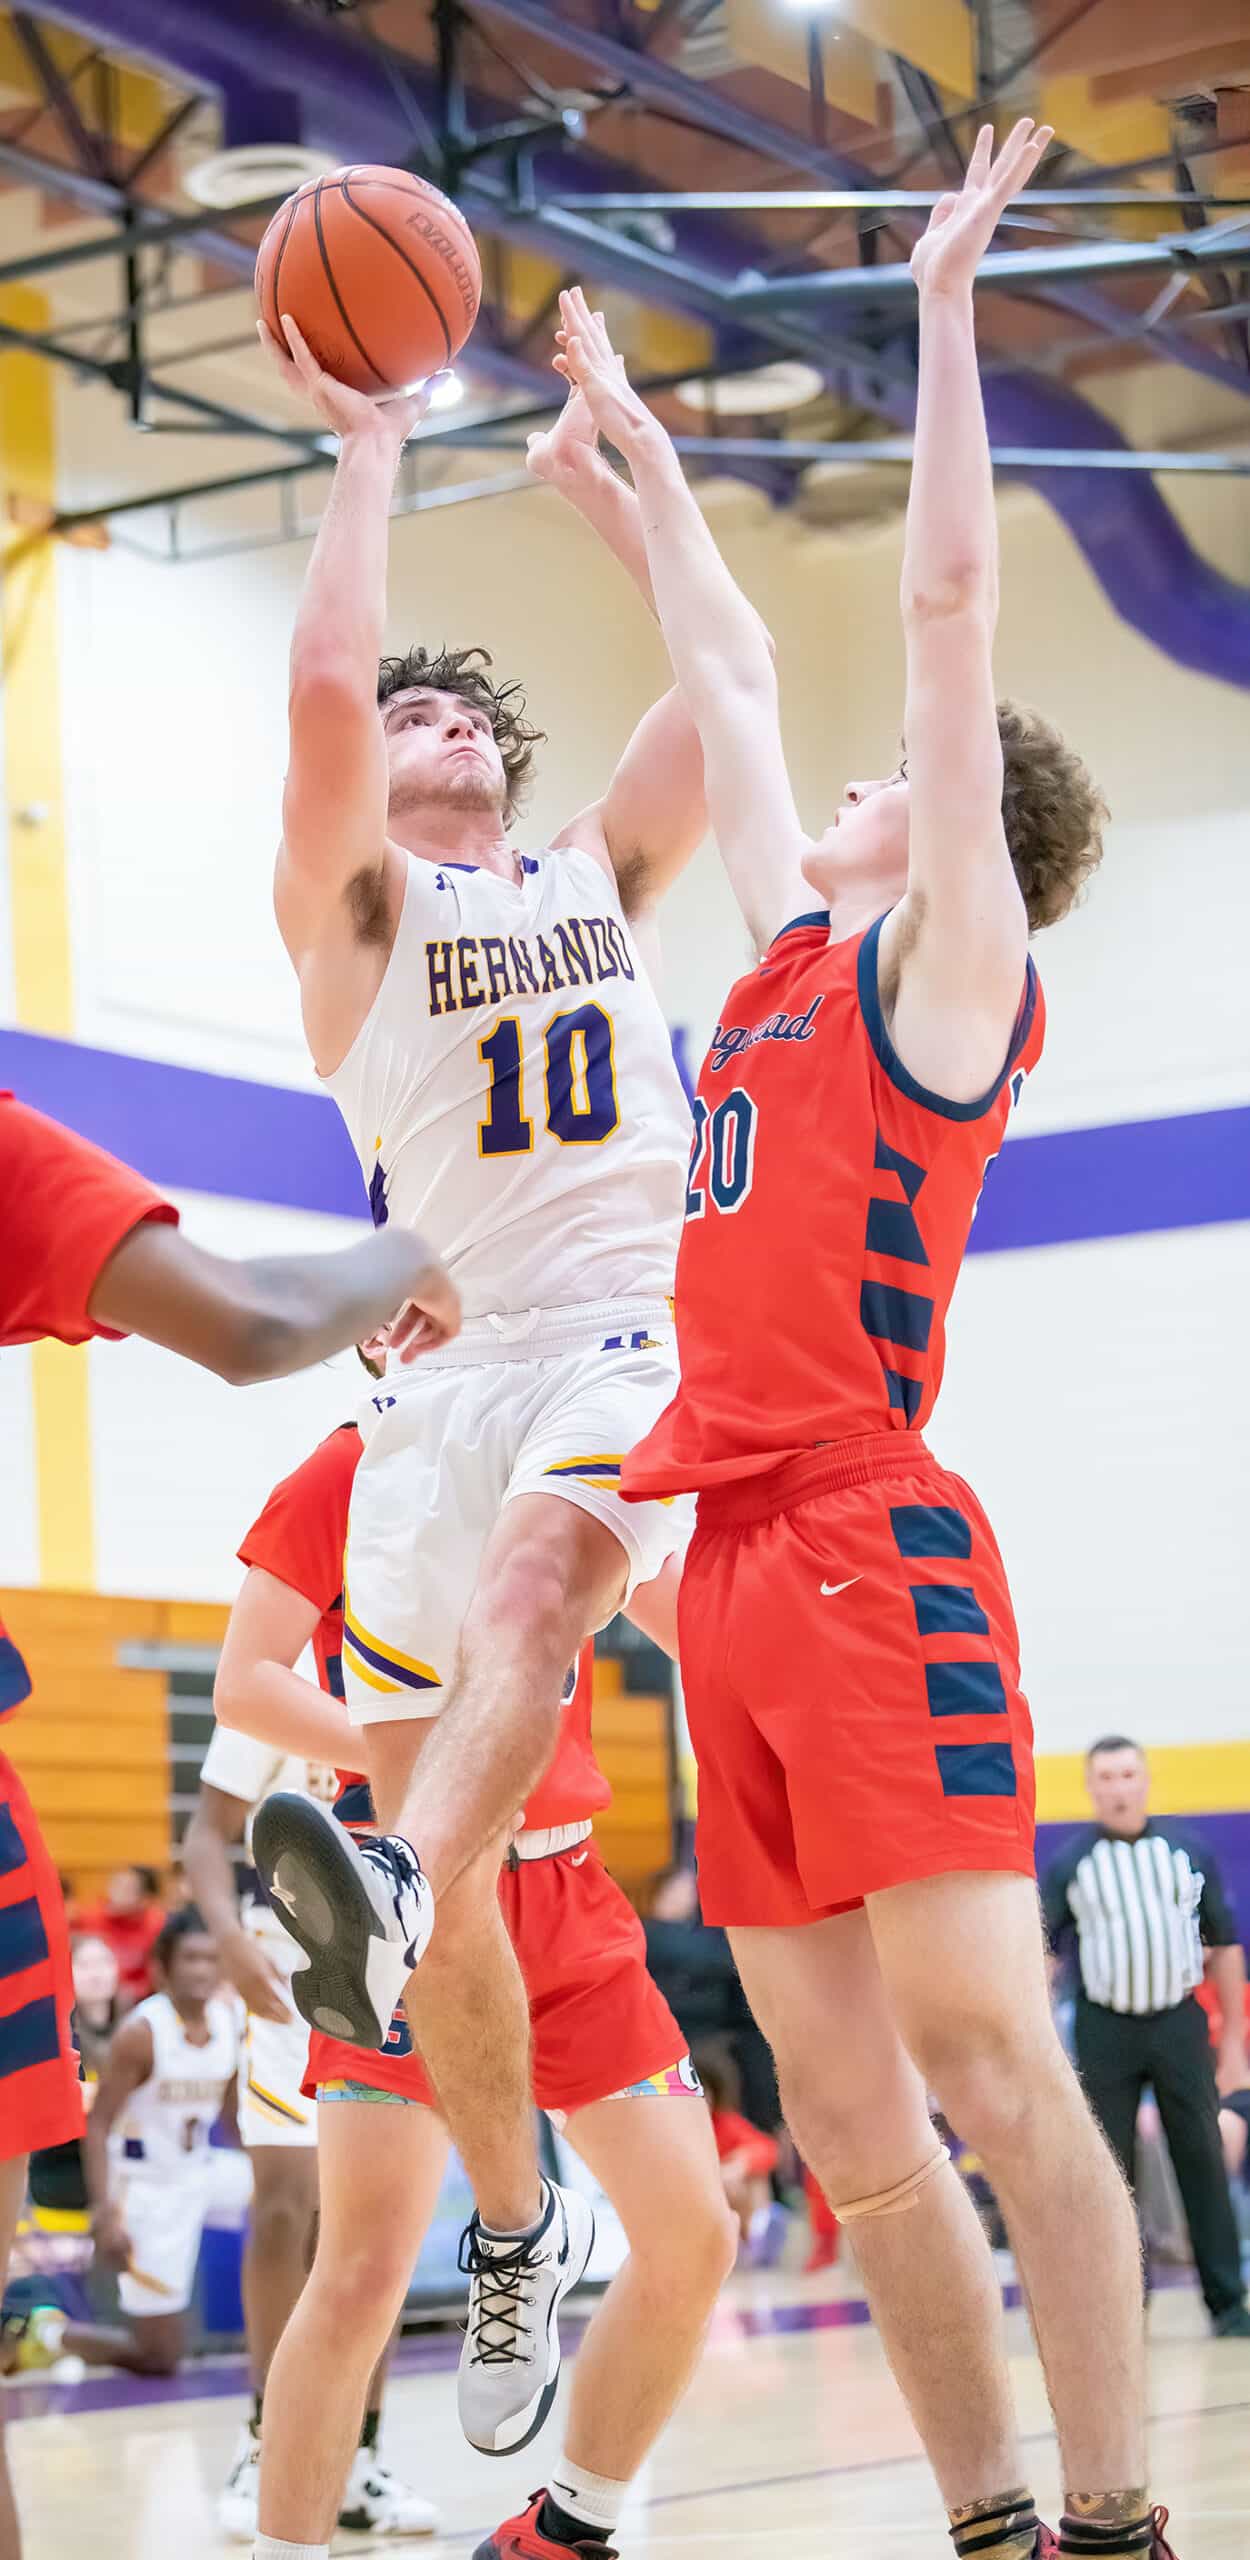 Hernando, 3, Josiah Wright extends to lift a shot past the defense by Springstead High, 4, Caidell Gilbert Tuesday 1/3/23 at Hernando High. Photo by JOE DiCRISTOFALO